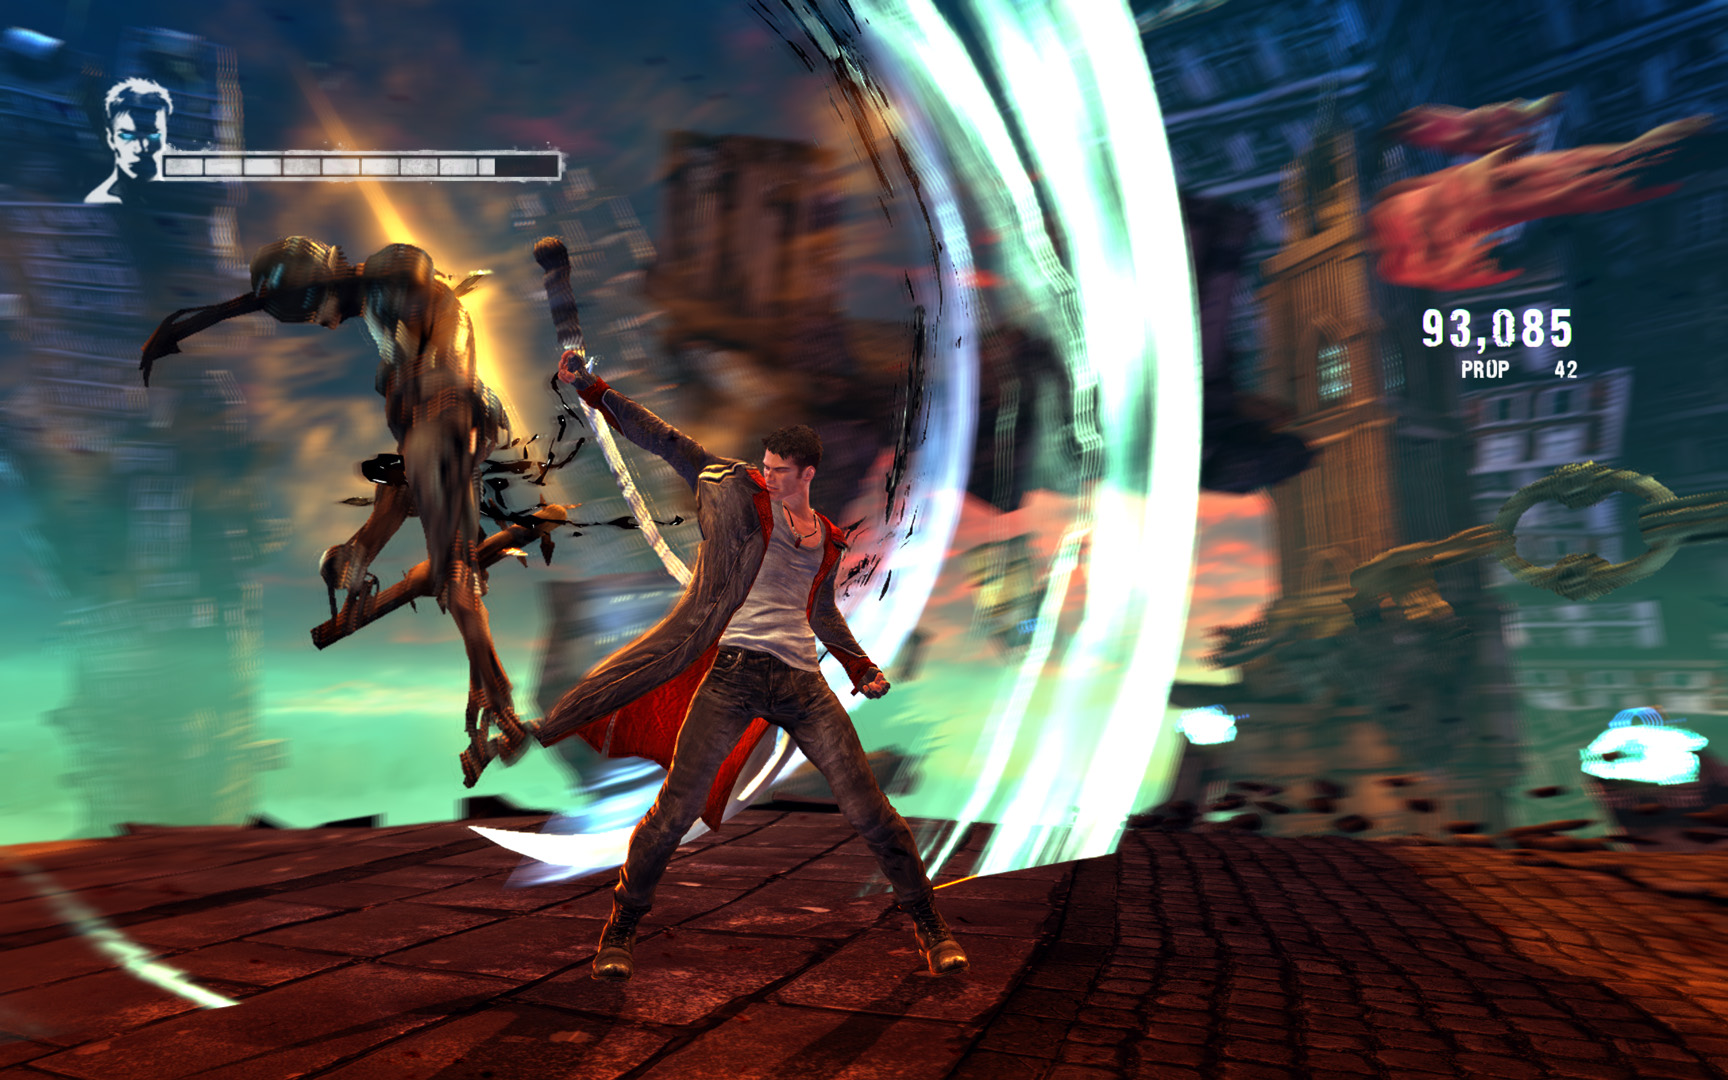 Dmc devil may cry free download full version for pc Dmc Devil May Cry Free Download Gametrex